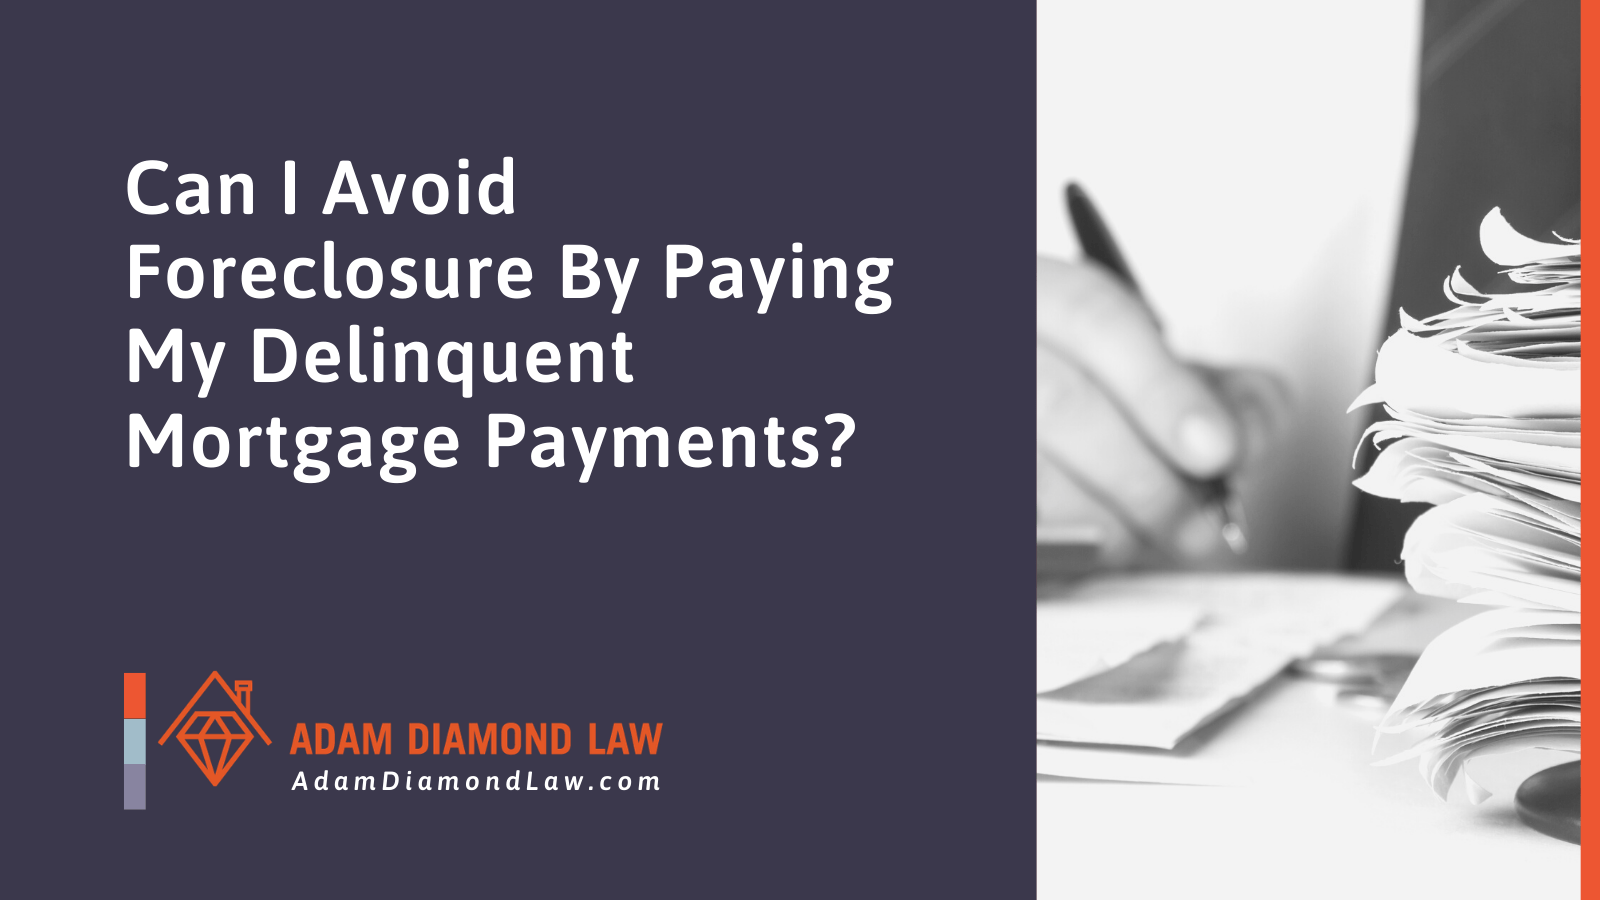 Can I Avoid Foreclosure By Paying My Delinquent Mortgage Payments - Adam Diamond Law | McHenry, IL Residential Real Estate Lawyer